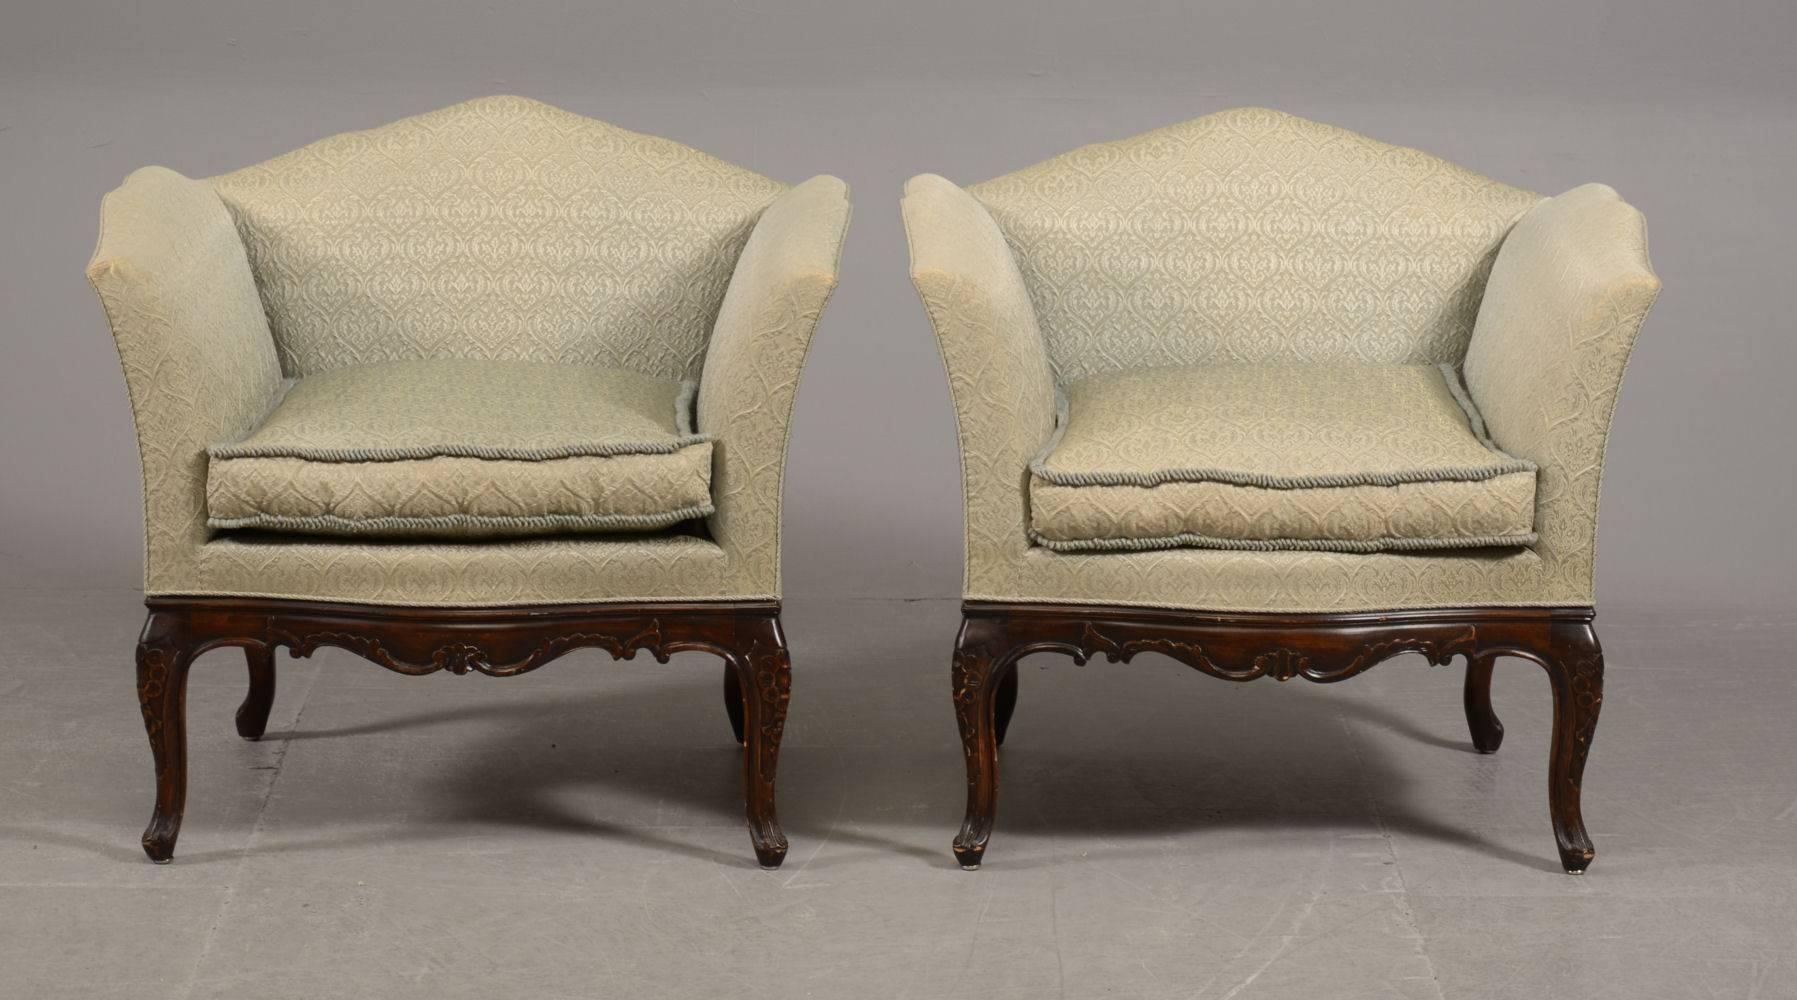 Pair of French Bergere mahogany armchairs, upholstered in the original damask. The cabriole legs carved with floriate detail. 